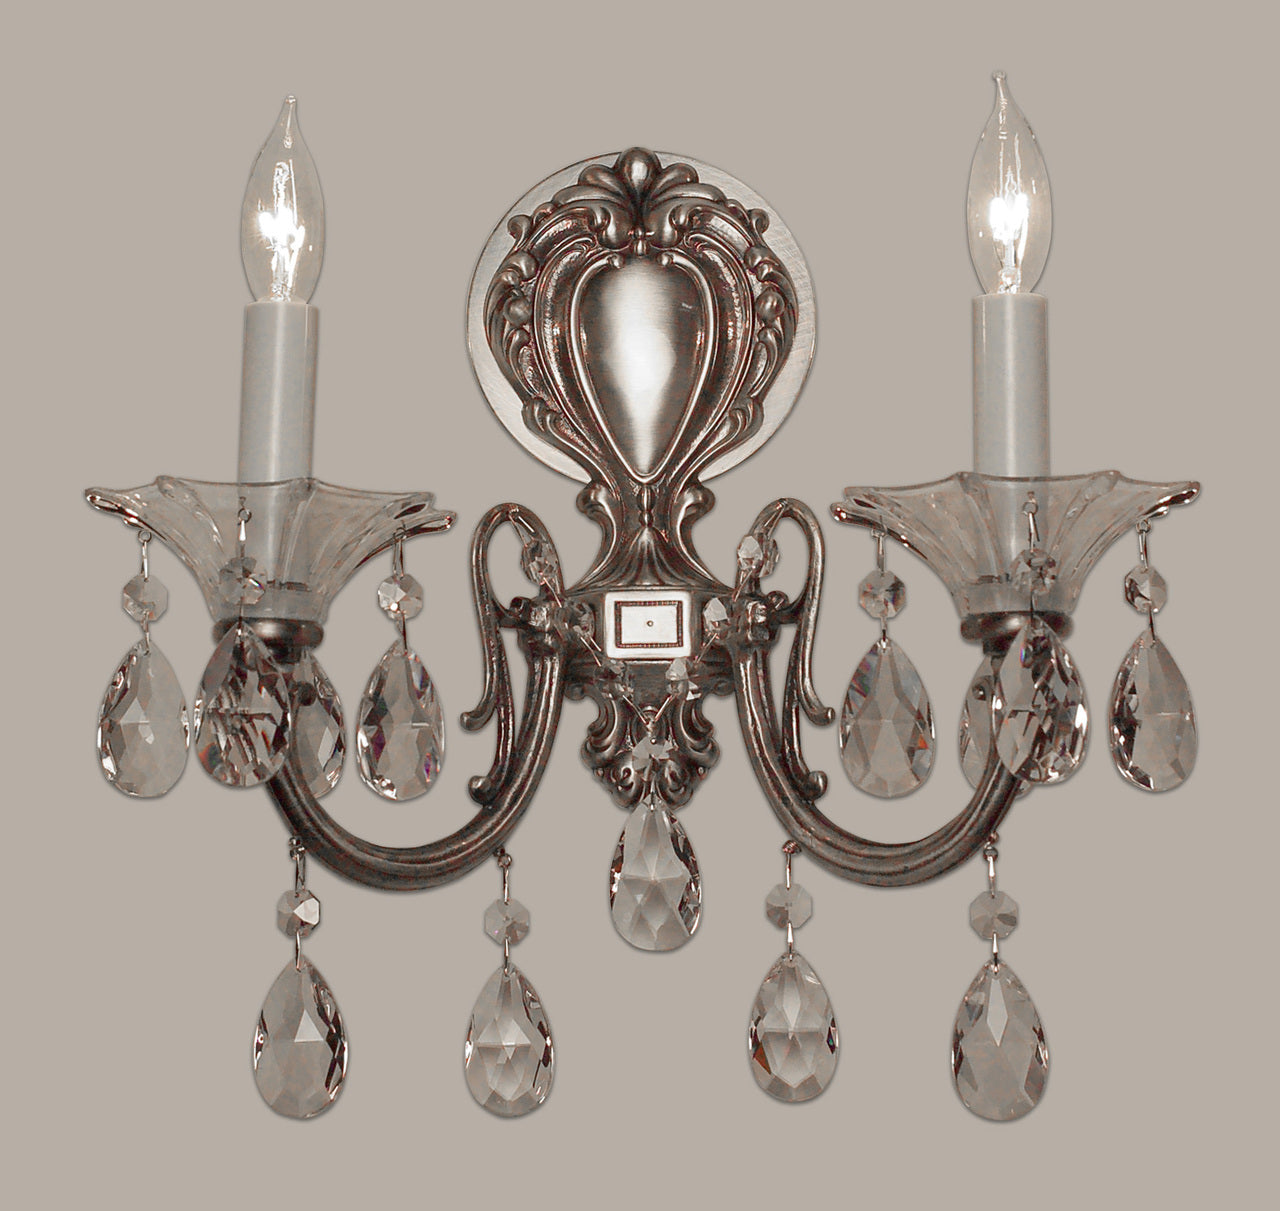 Classic Lighting 57052 RB SJT Via Lombardi Crystal Wall Sconce in Roman Bronze (Imported from Spain)